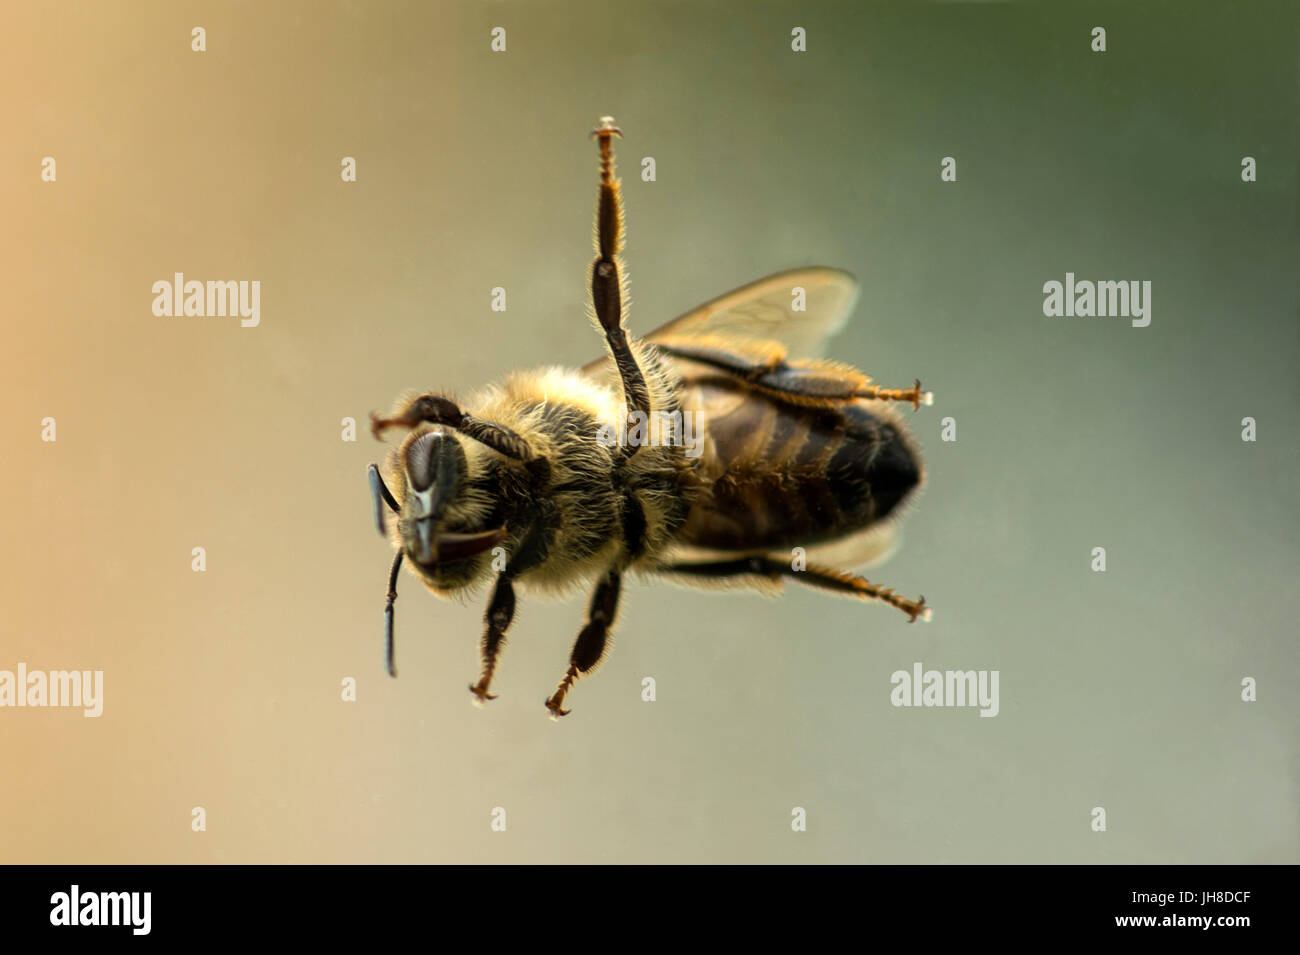 Single British Honey Bee (Apis) depicted close up through glass transparency, isolated against background Stock Photo